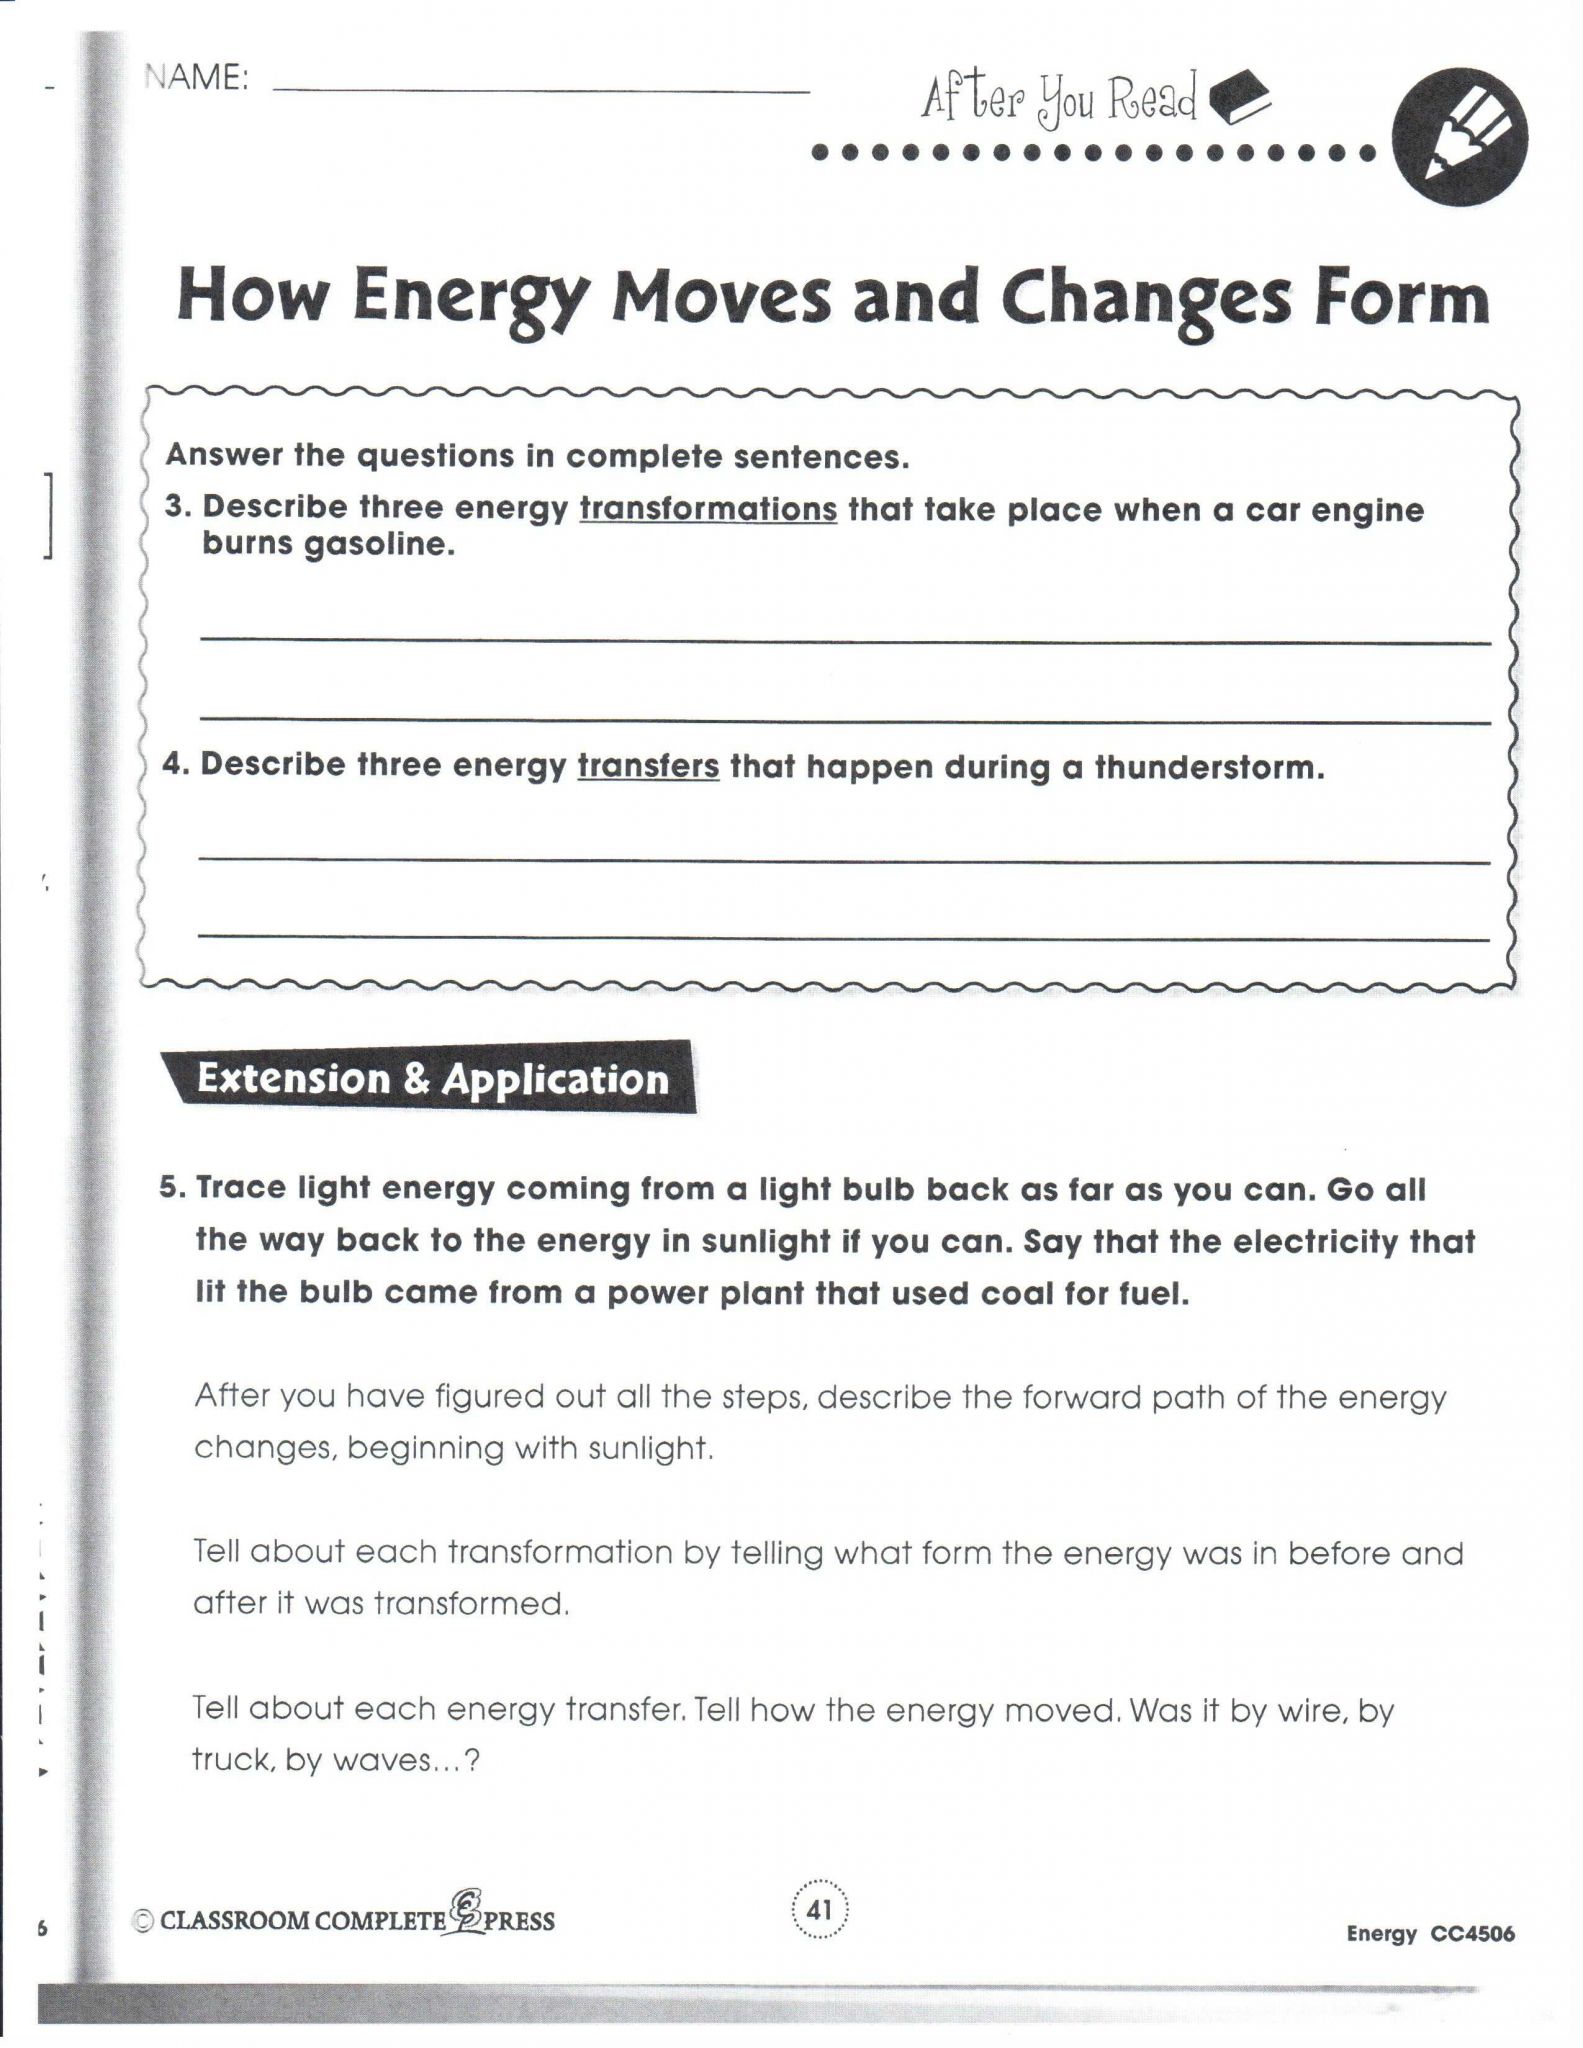 Physical Science Worksheet Conservation Of Energy 2 Answer Key as Well as 36 Awesome Physical Science Work and Power Worksheet Answers